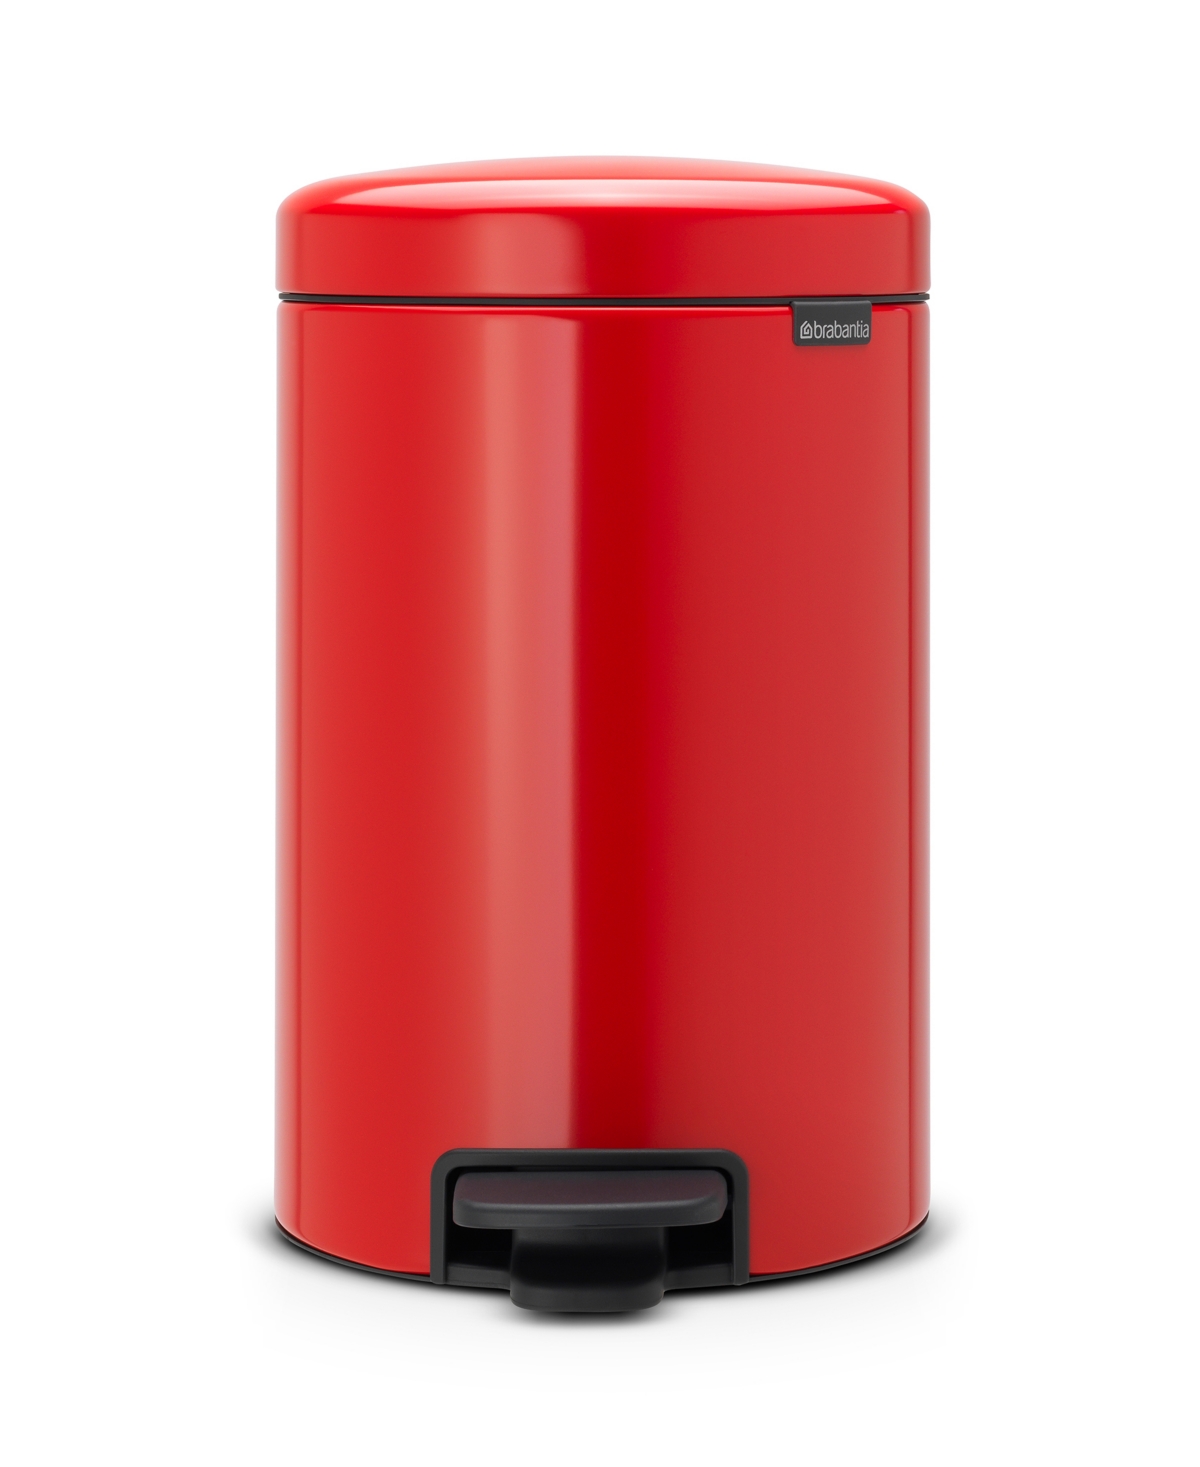 newIcon 3.2G Step Trash Can - Passion Red